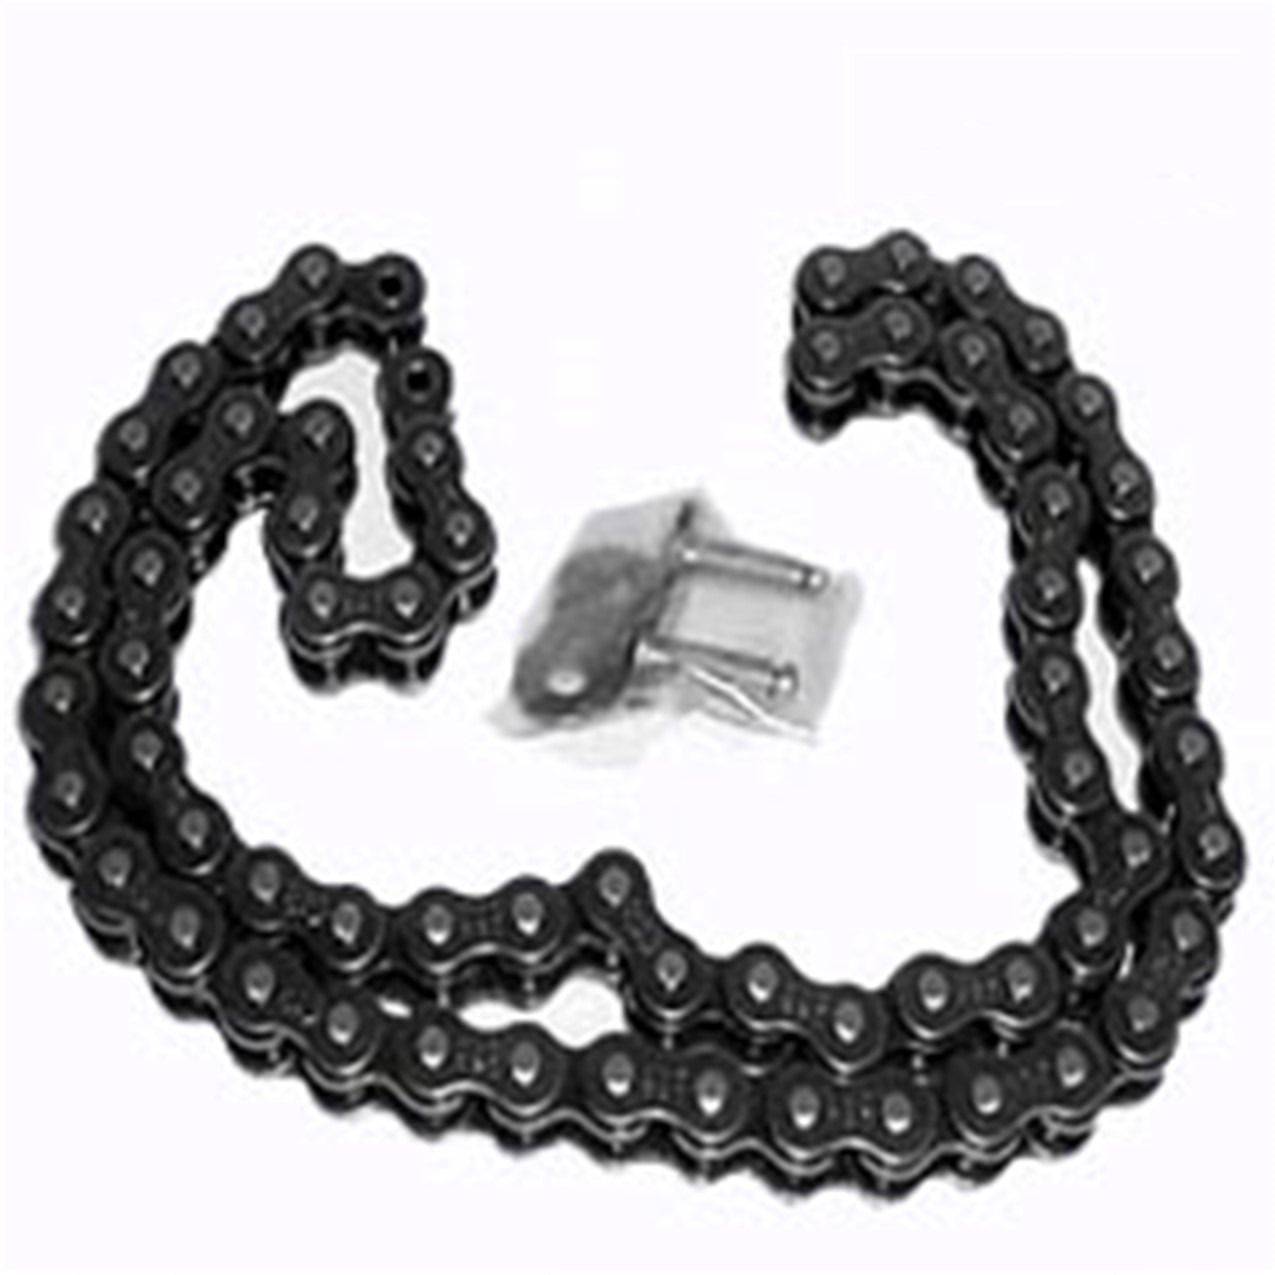 Chain #520 x 66 Links with Master Link Fits E-Ton 2007-2013 Viper RXL70, RXL90R, Viper RX4-70, RX4-90, RX4-90R, + Other Brands